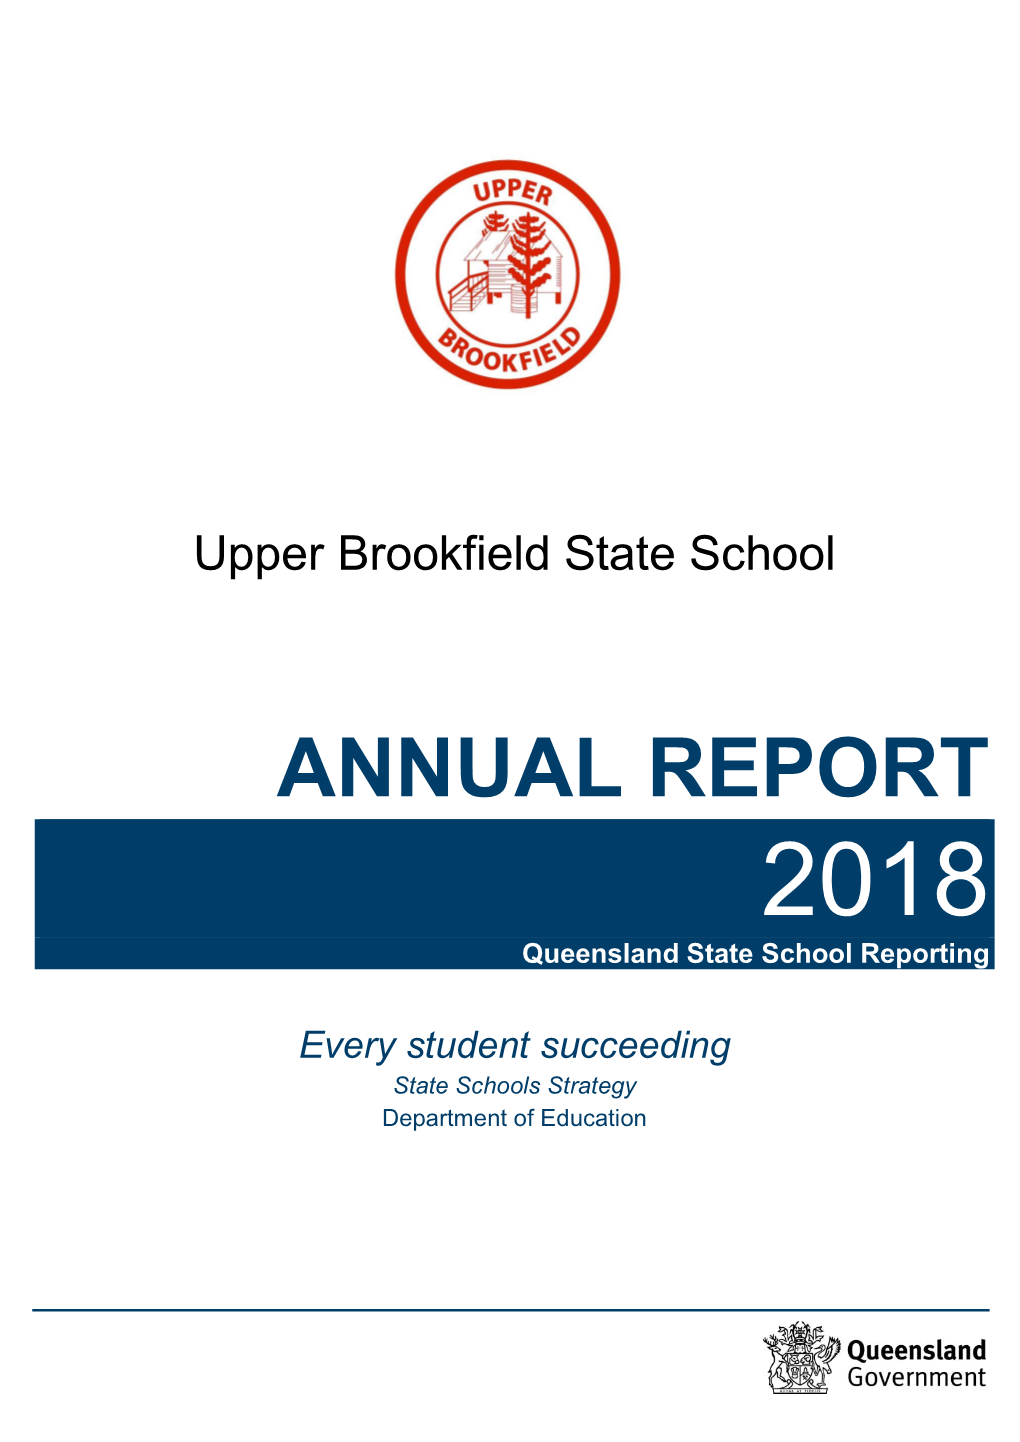 ANNUAL REPORT 2018 Queensland State School Reporting